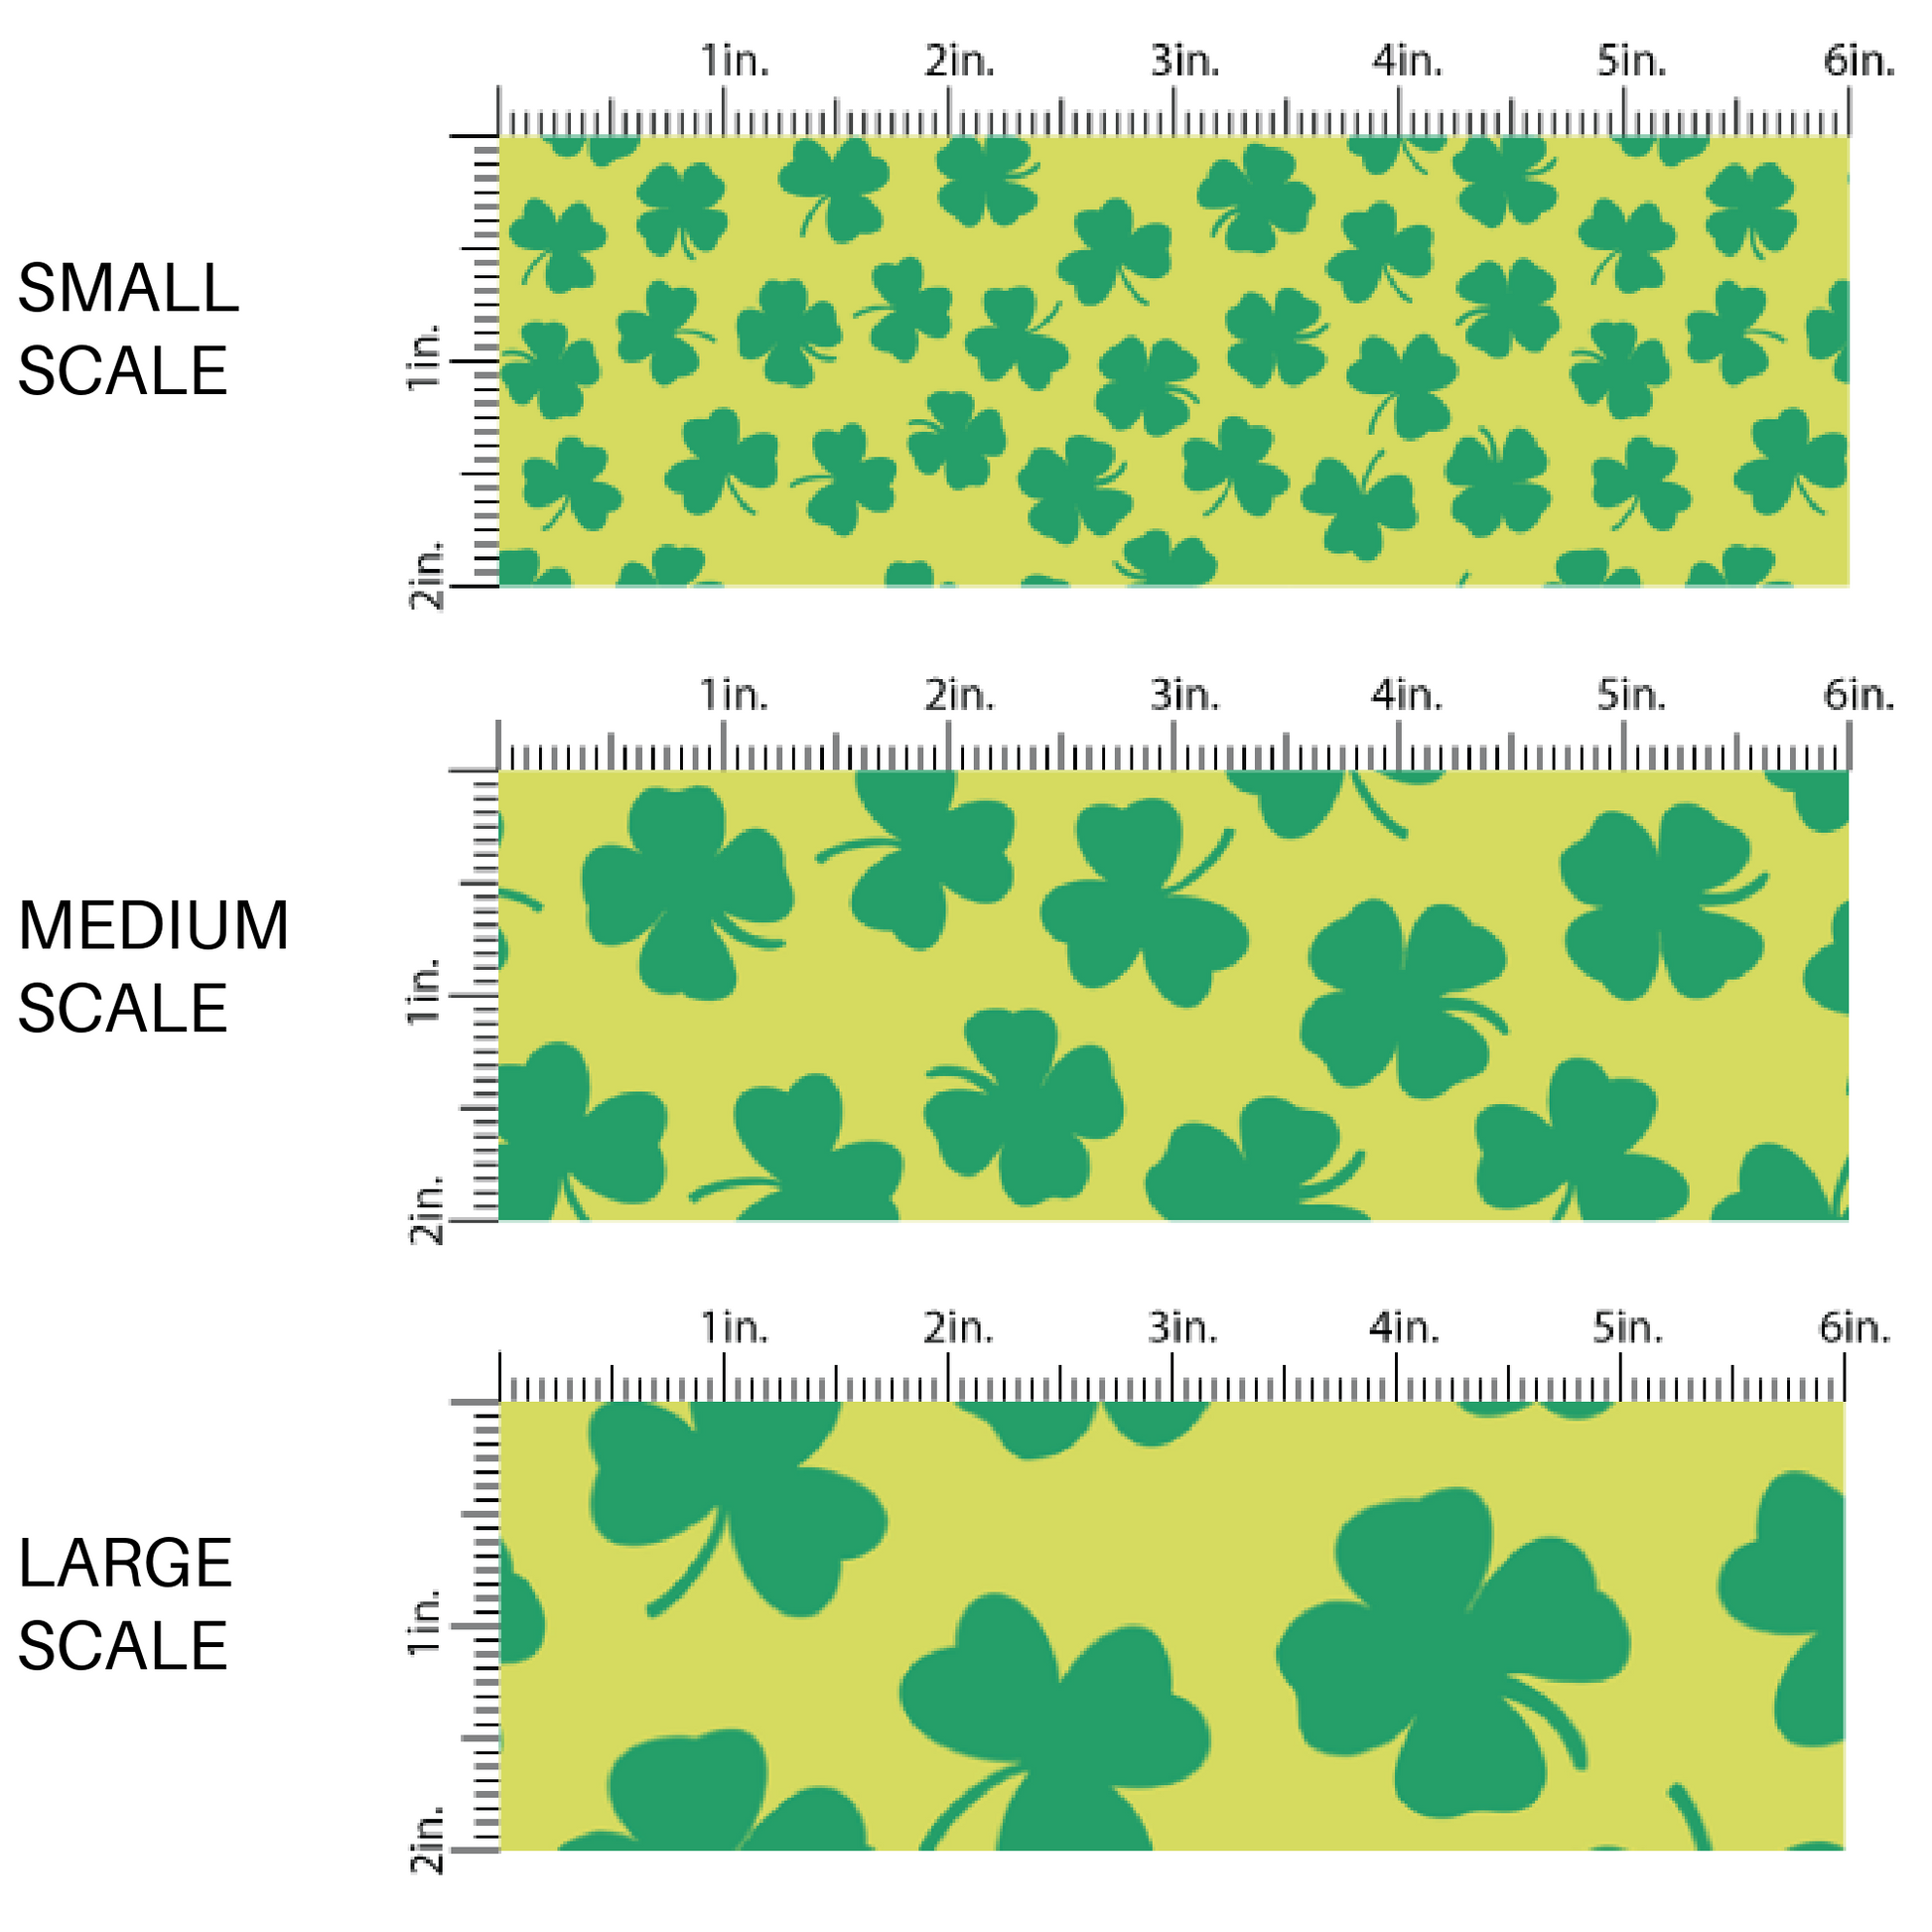 Green Shamrocks on Lime Green Fabric by the Yard scaled image guide.